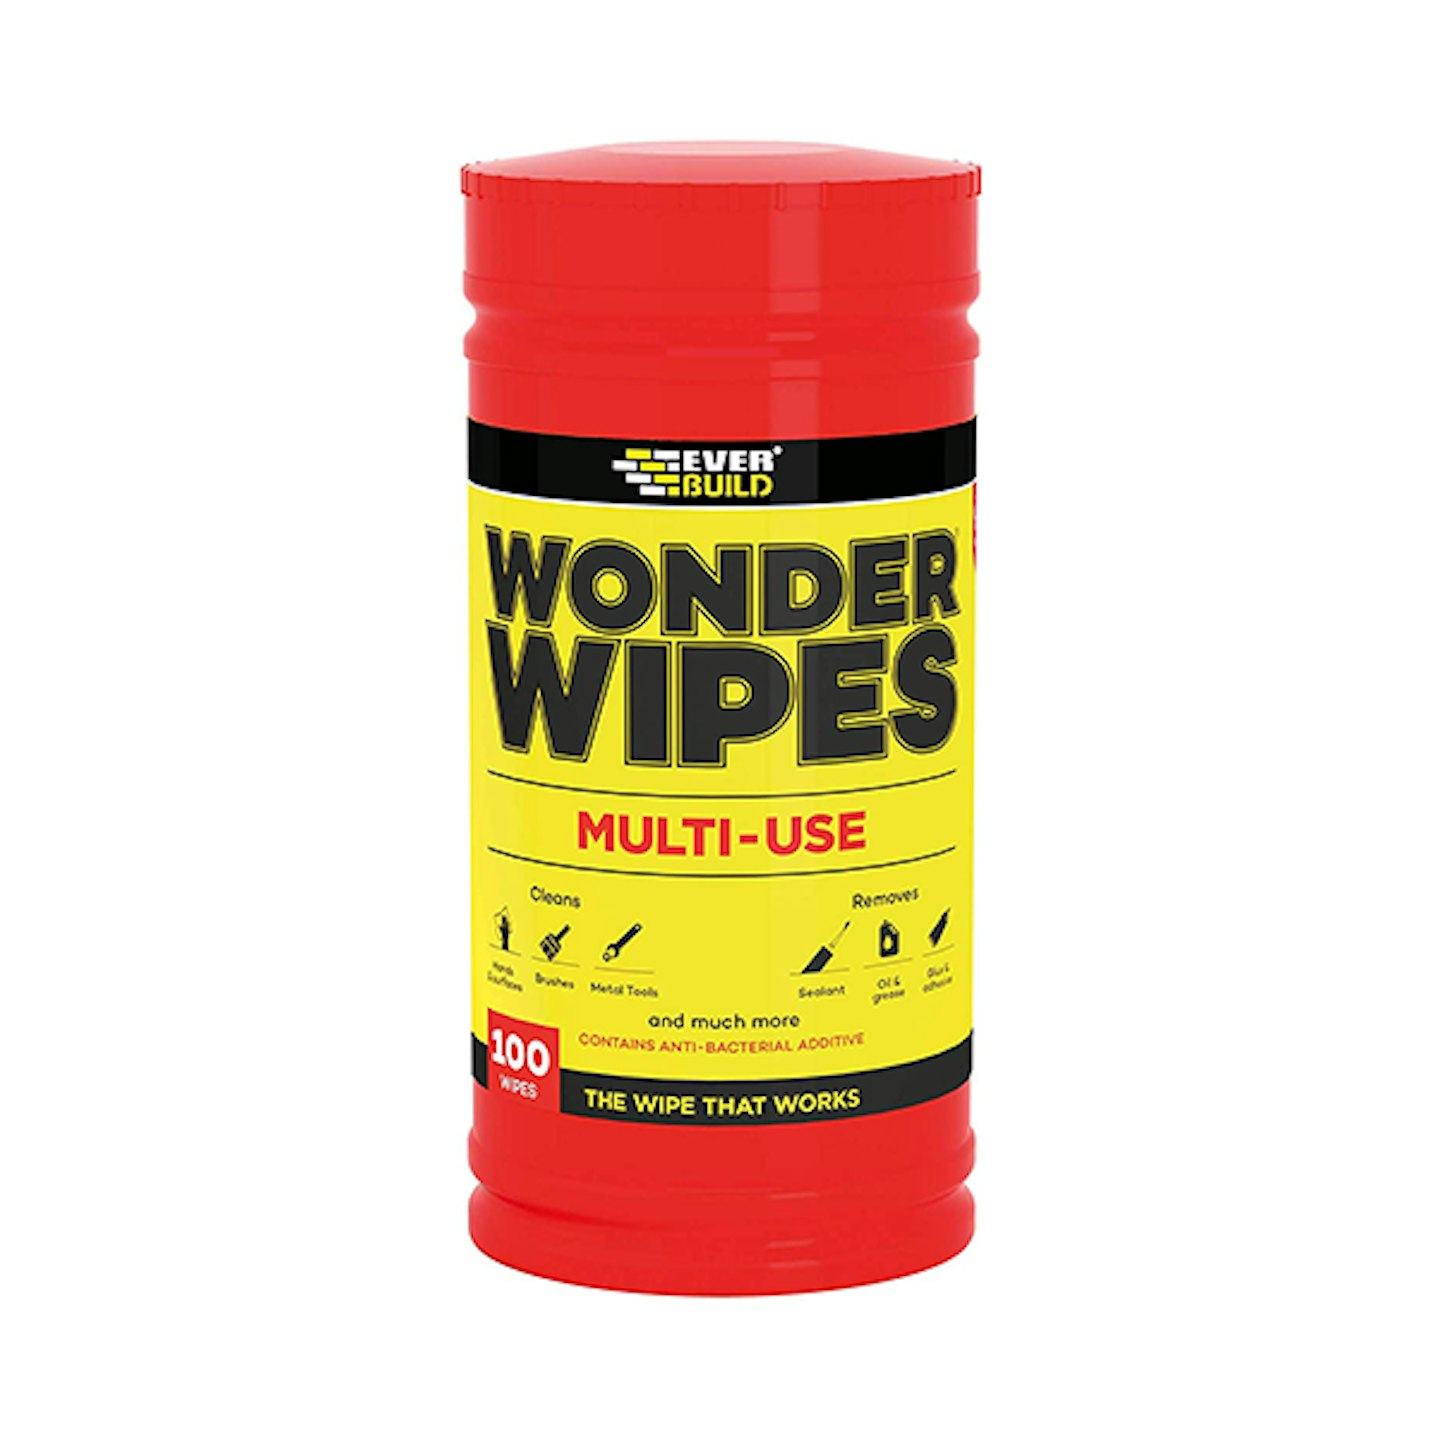 Everbuild Wonder Wipes - Multi-Use Cleaning Wipes